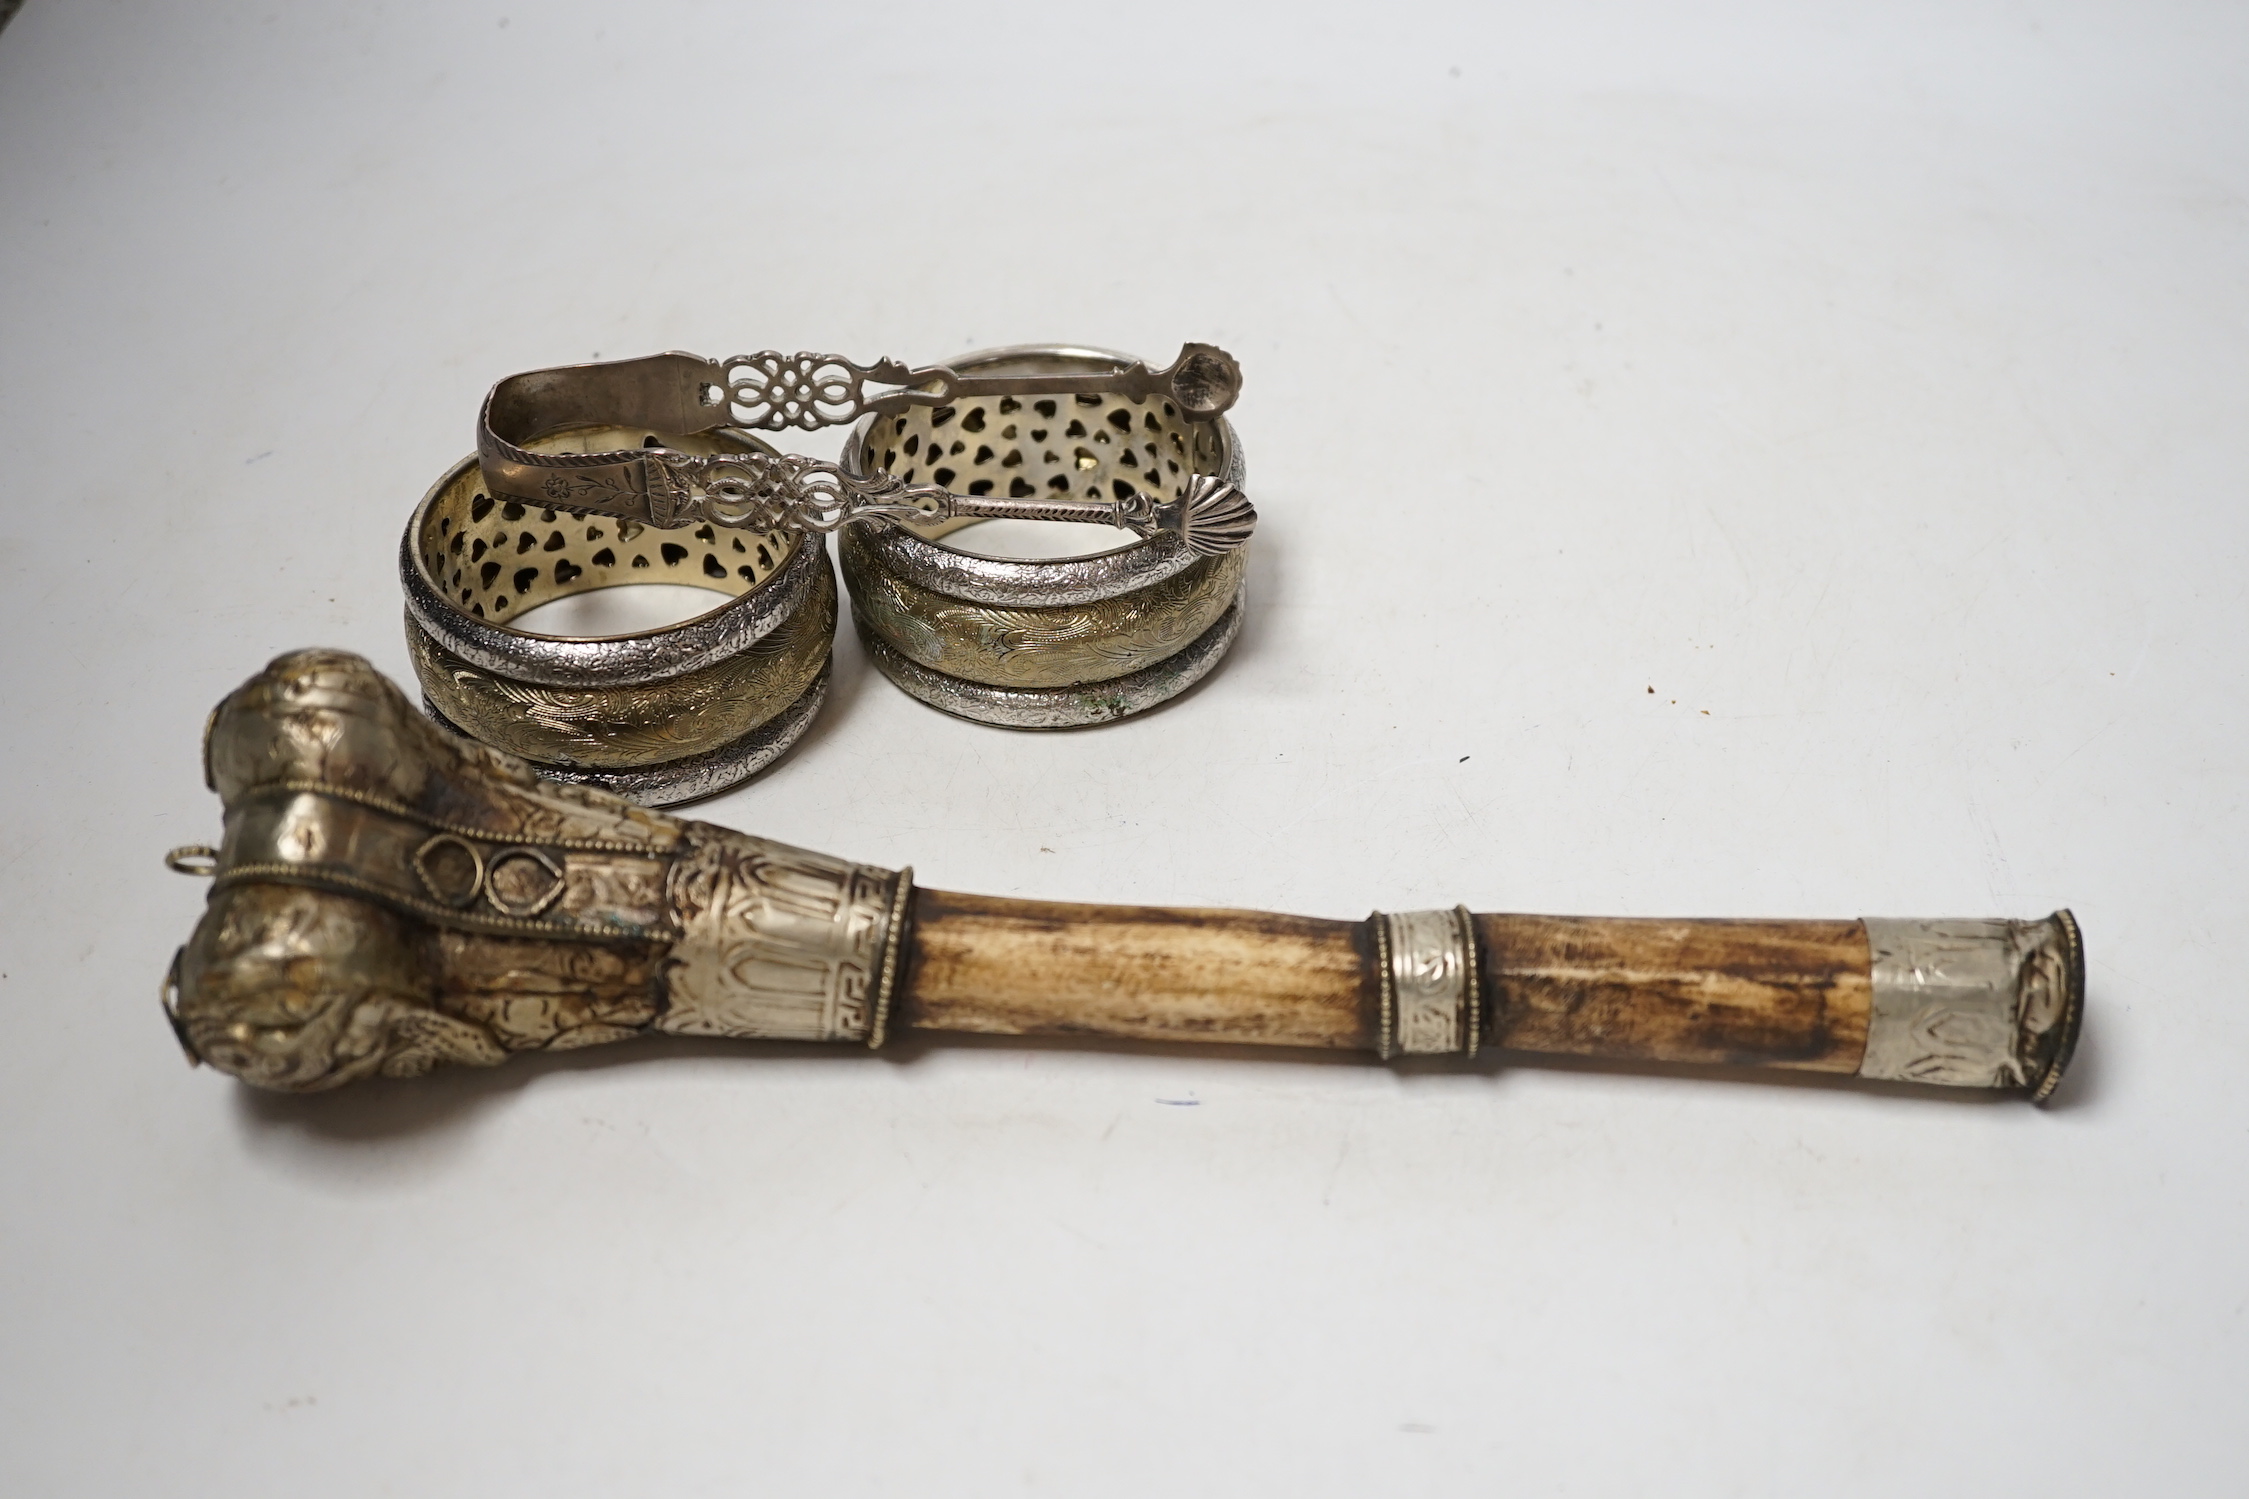 A pair of Georgian silver sugar tongs, a mounted bone implement and a pair of mixed metal bangles.